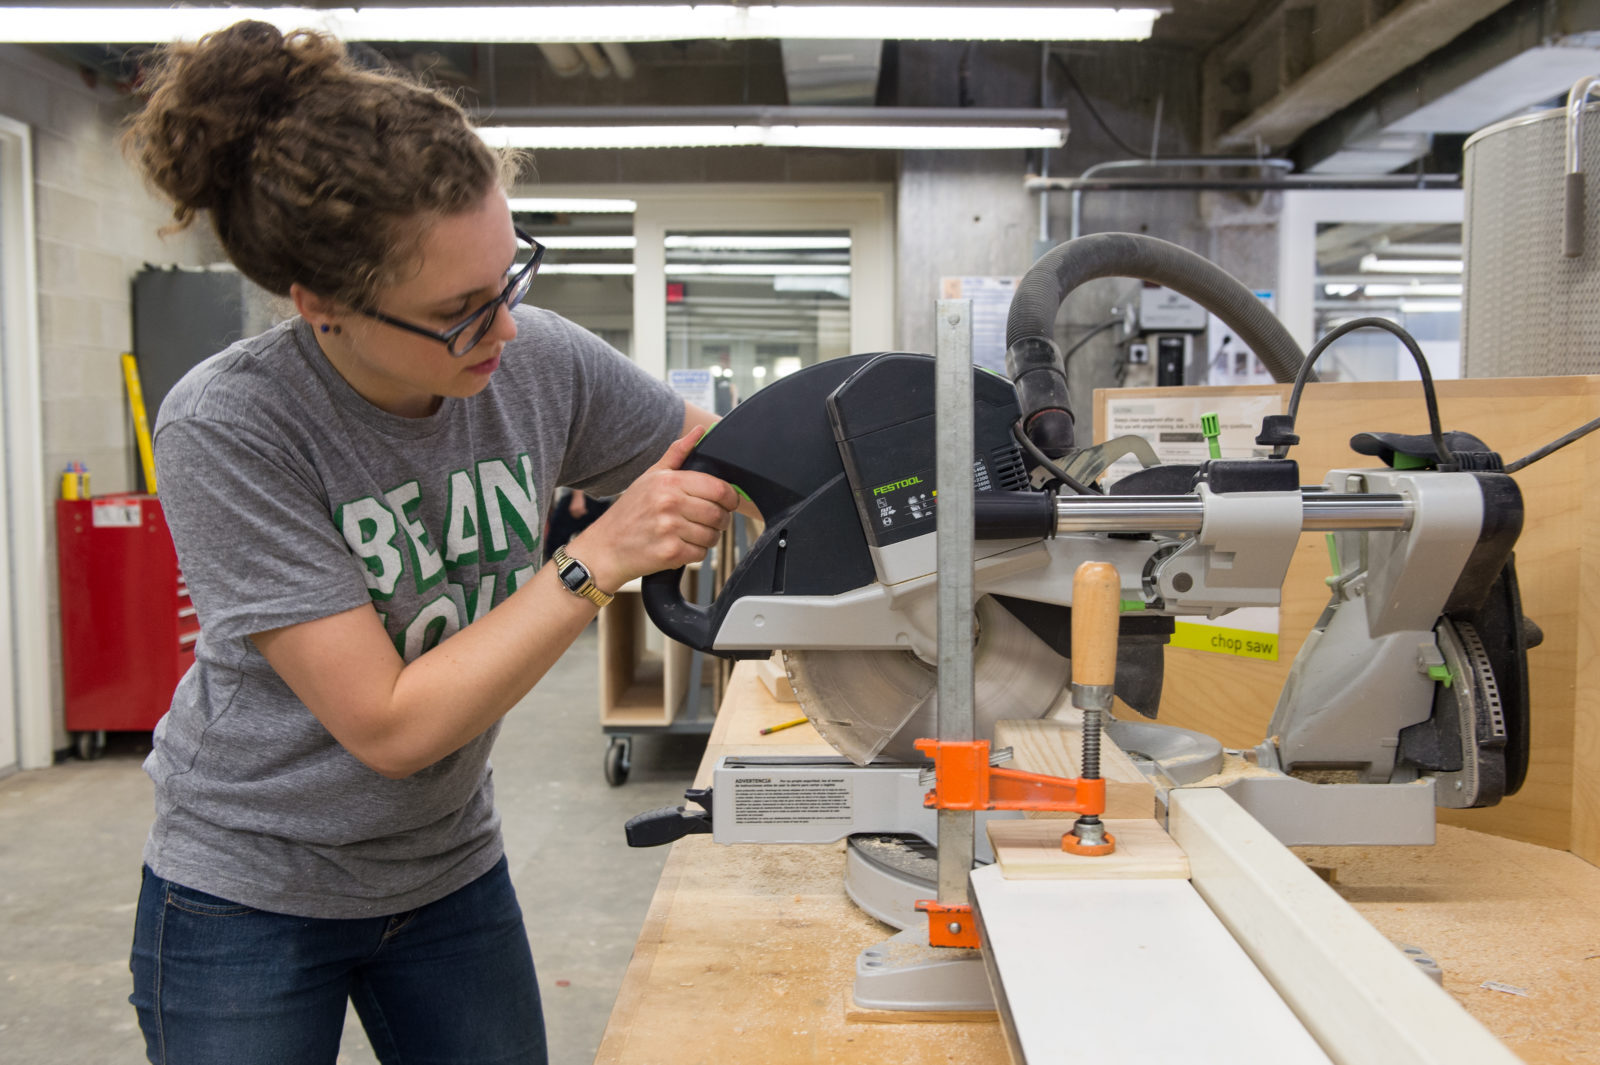 Student using compound mitre saw within the woodshop of the Fabrication Lab.